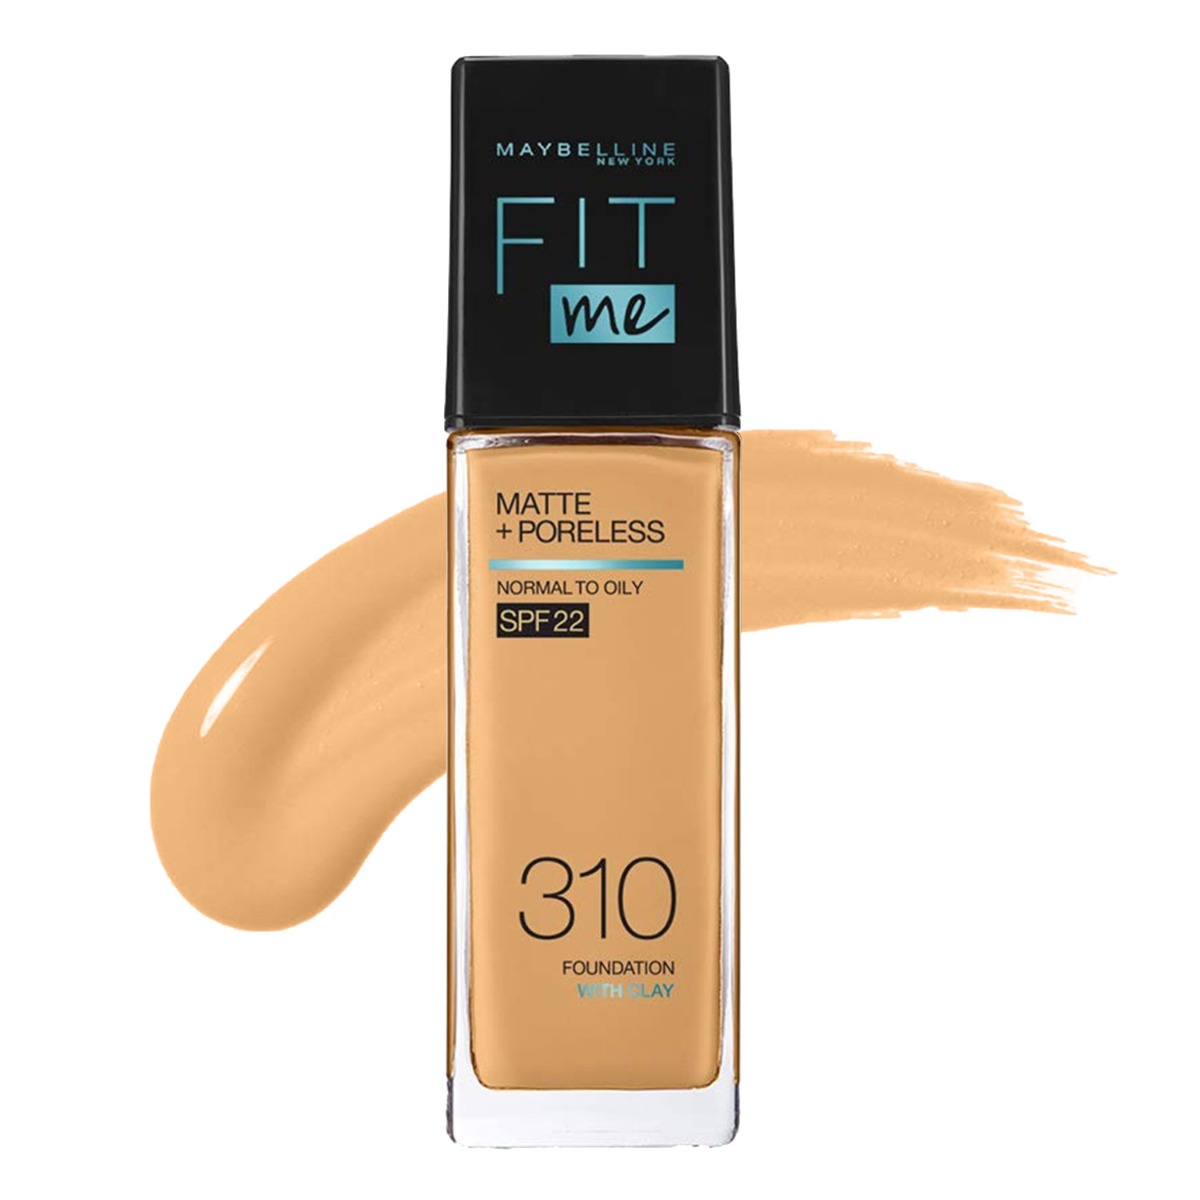 Maybelline New York Fit Me Matte+Poreless Liquid Foundation With Clay - 310 Sun beige, 30ml